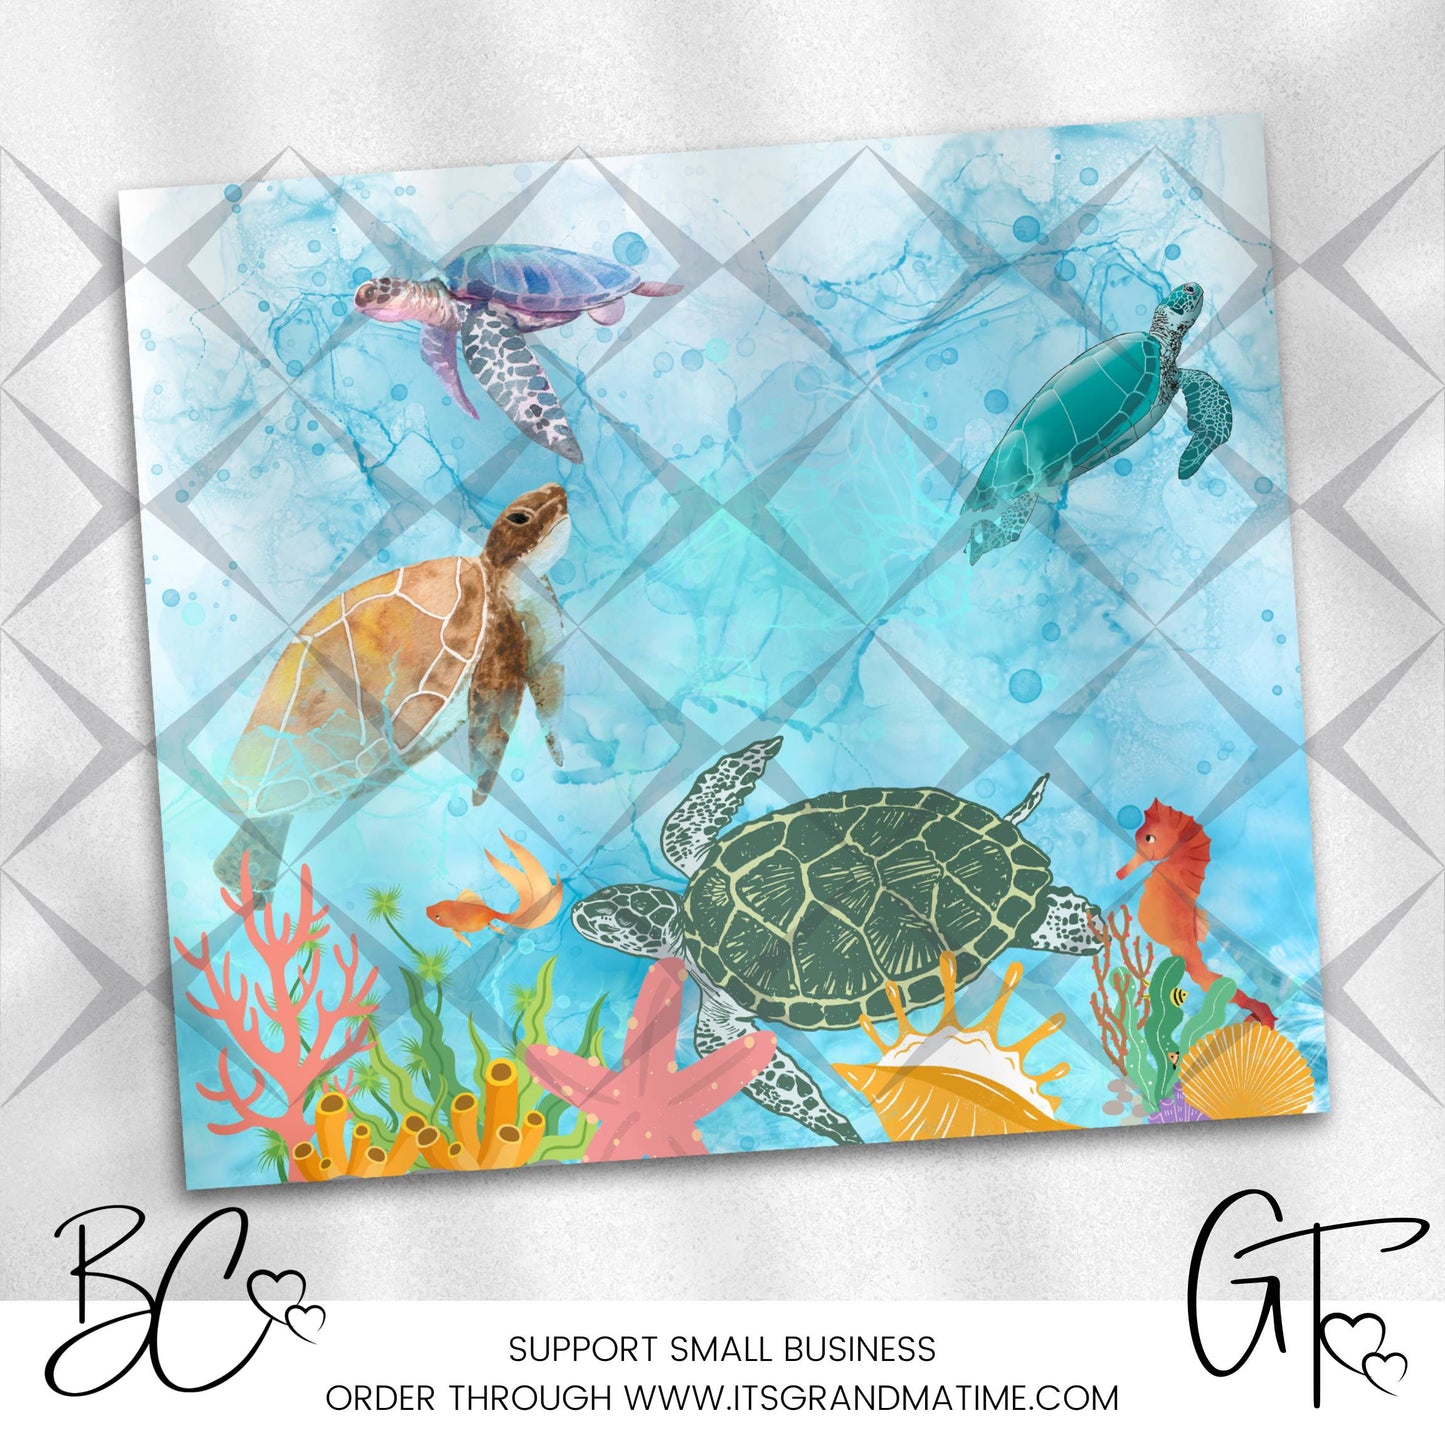 SUB806 Sea Turtles with Coral Reef Tumbler Sublimation Transfer